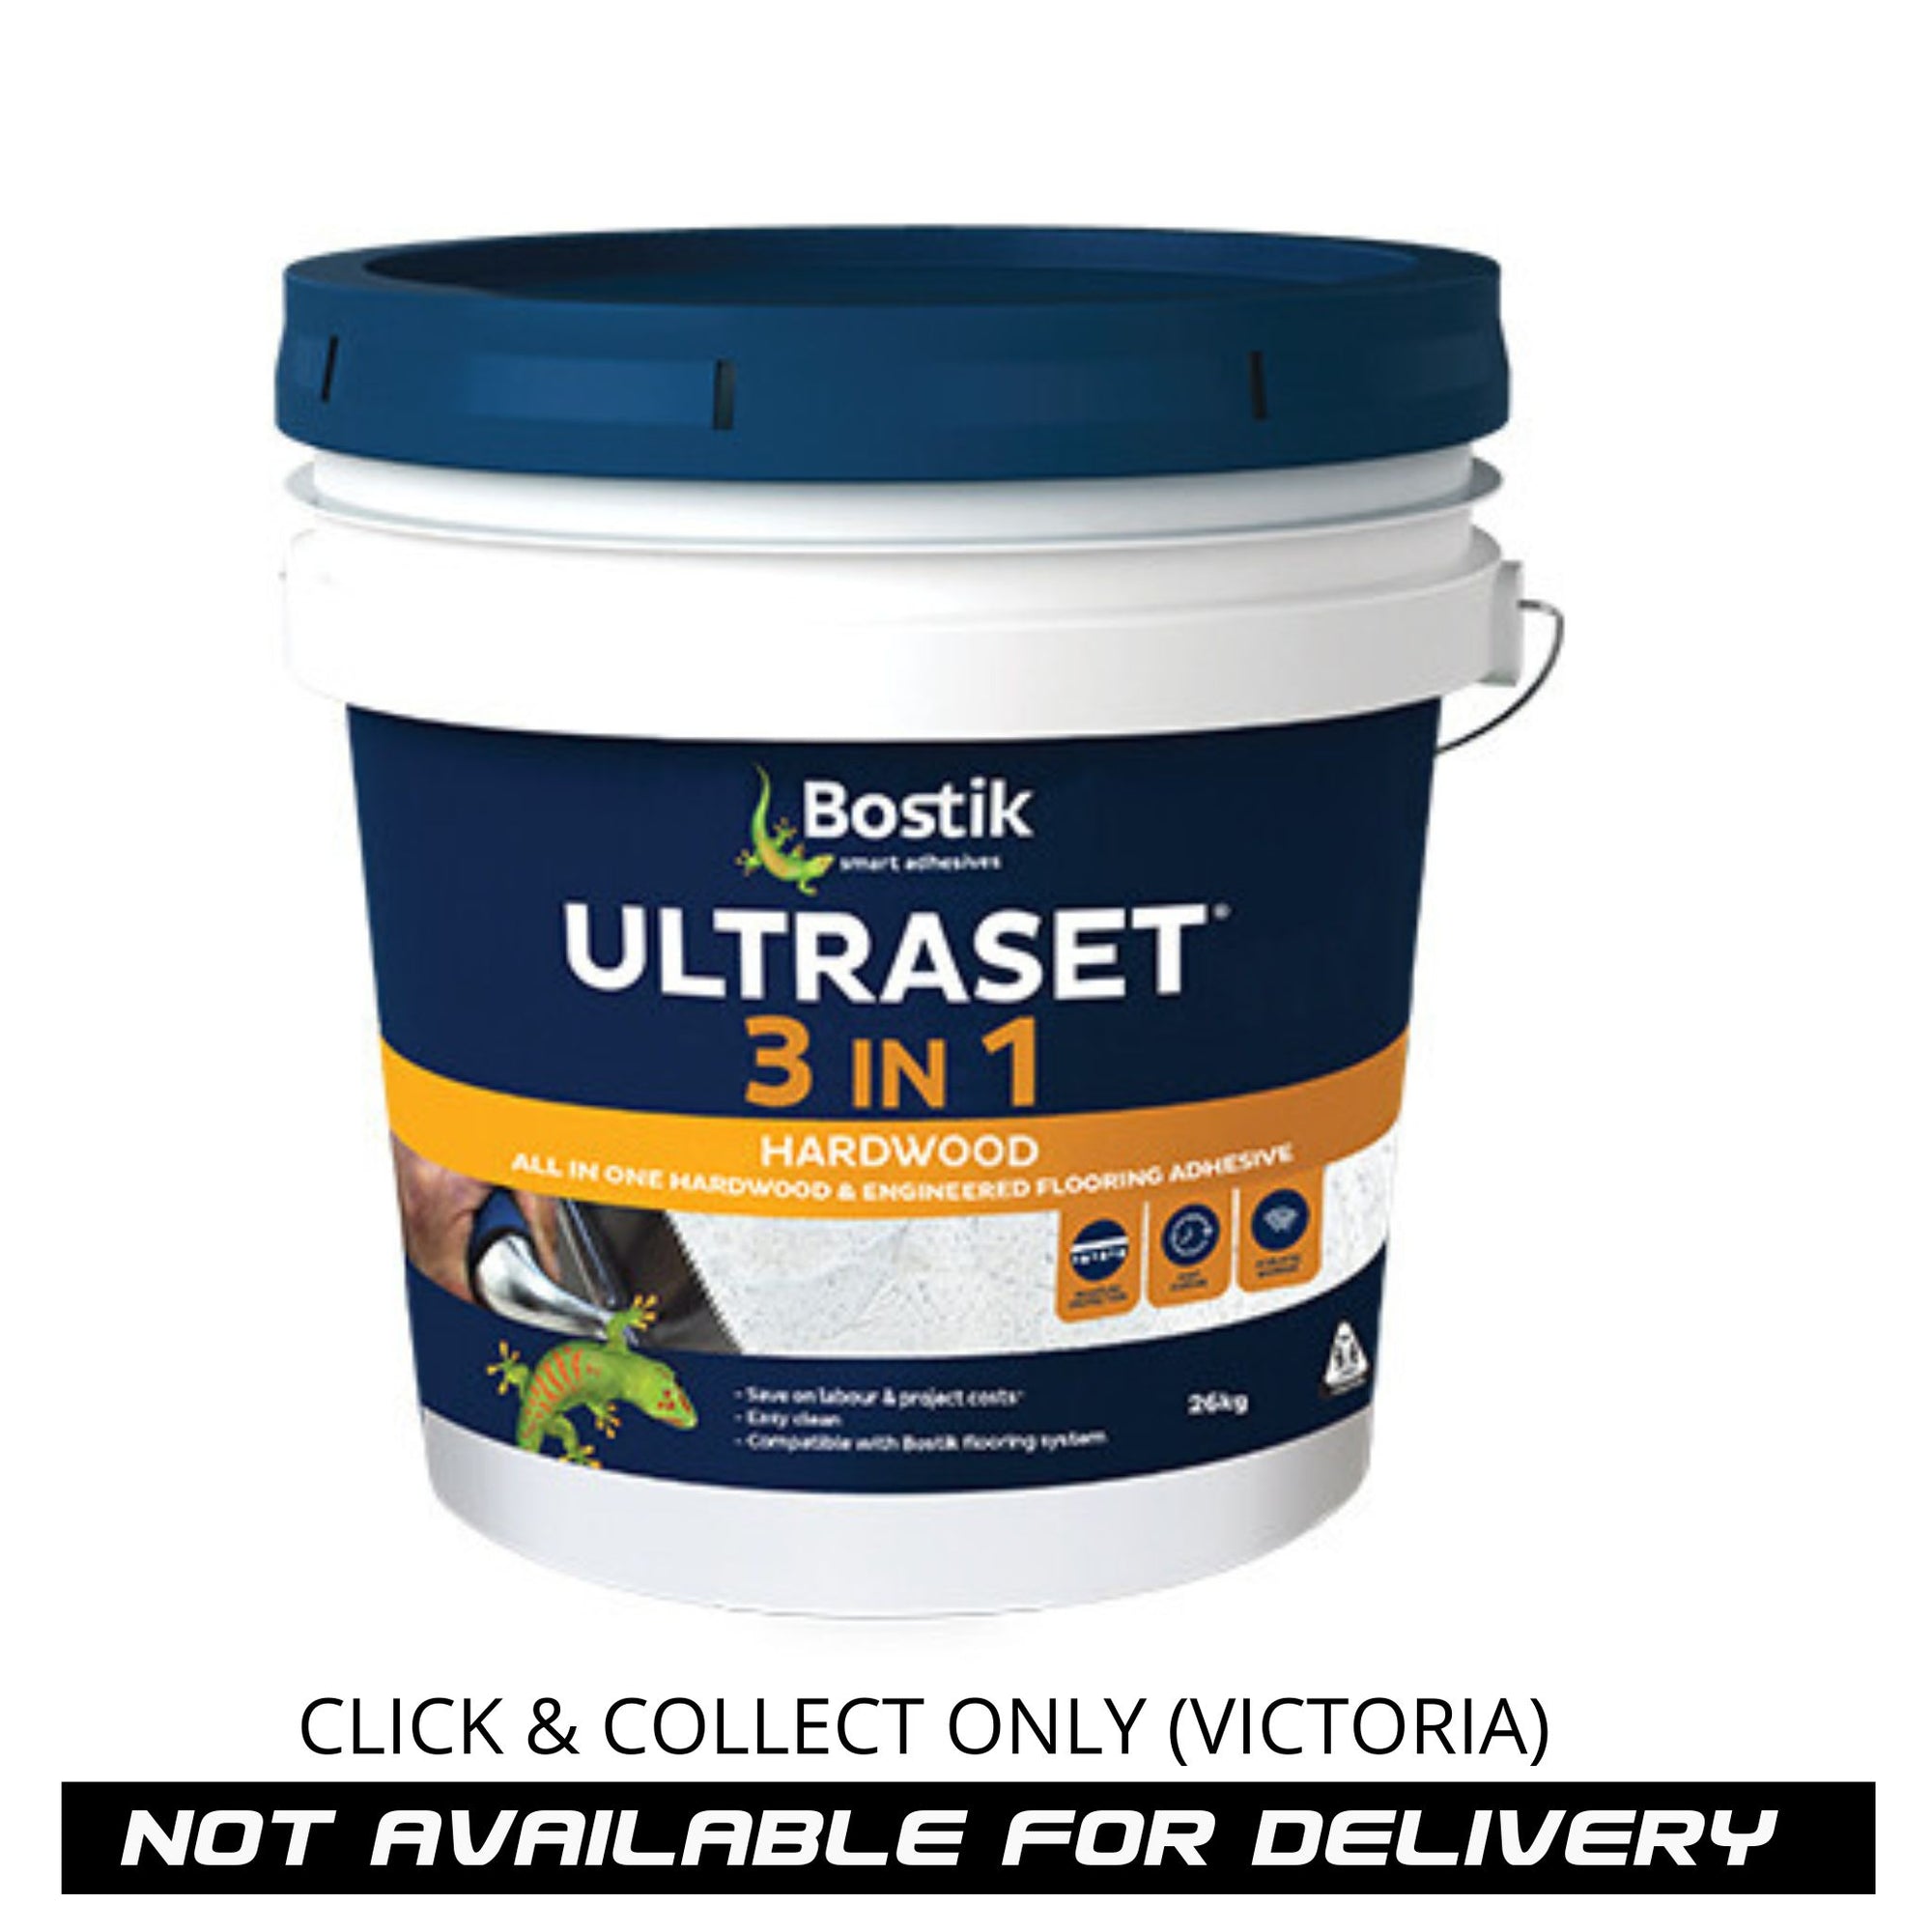 BOSTIK ULTRASET 3-IN-1 FLOORING ADHESIVE 30615274 - 26kg - South East Clearance Centre